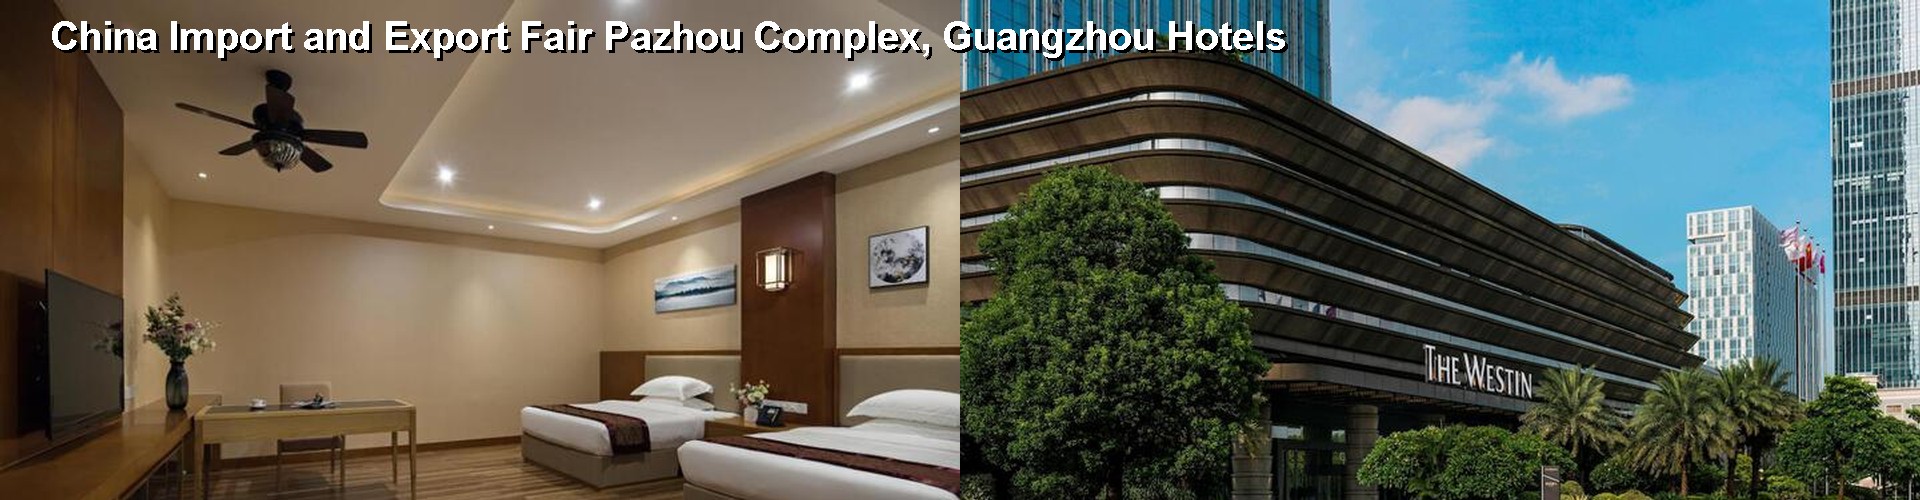 5 Best Hotels near China Import and Export Fair Pazhou Complex, Guangzhou